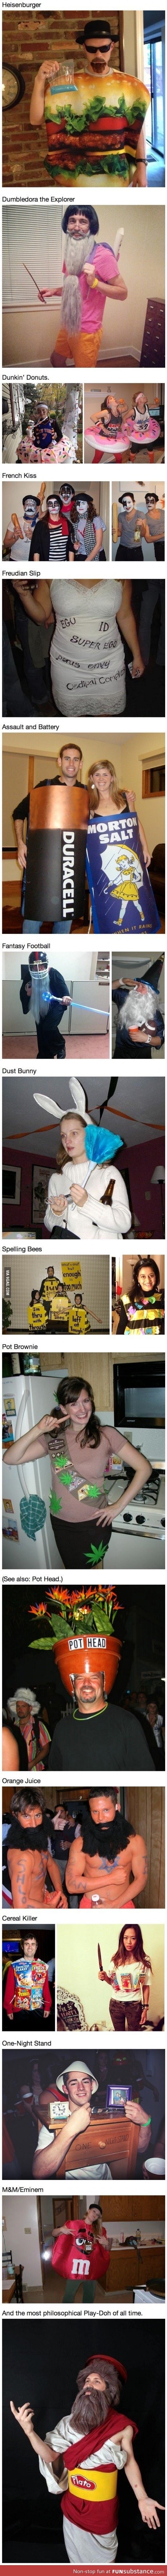 Some clever costumes